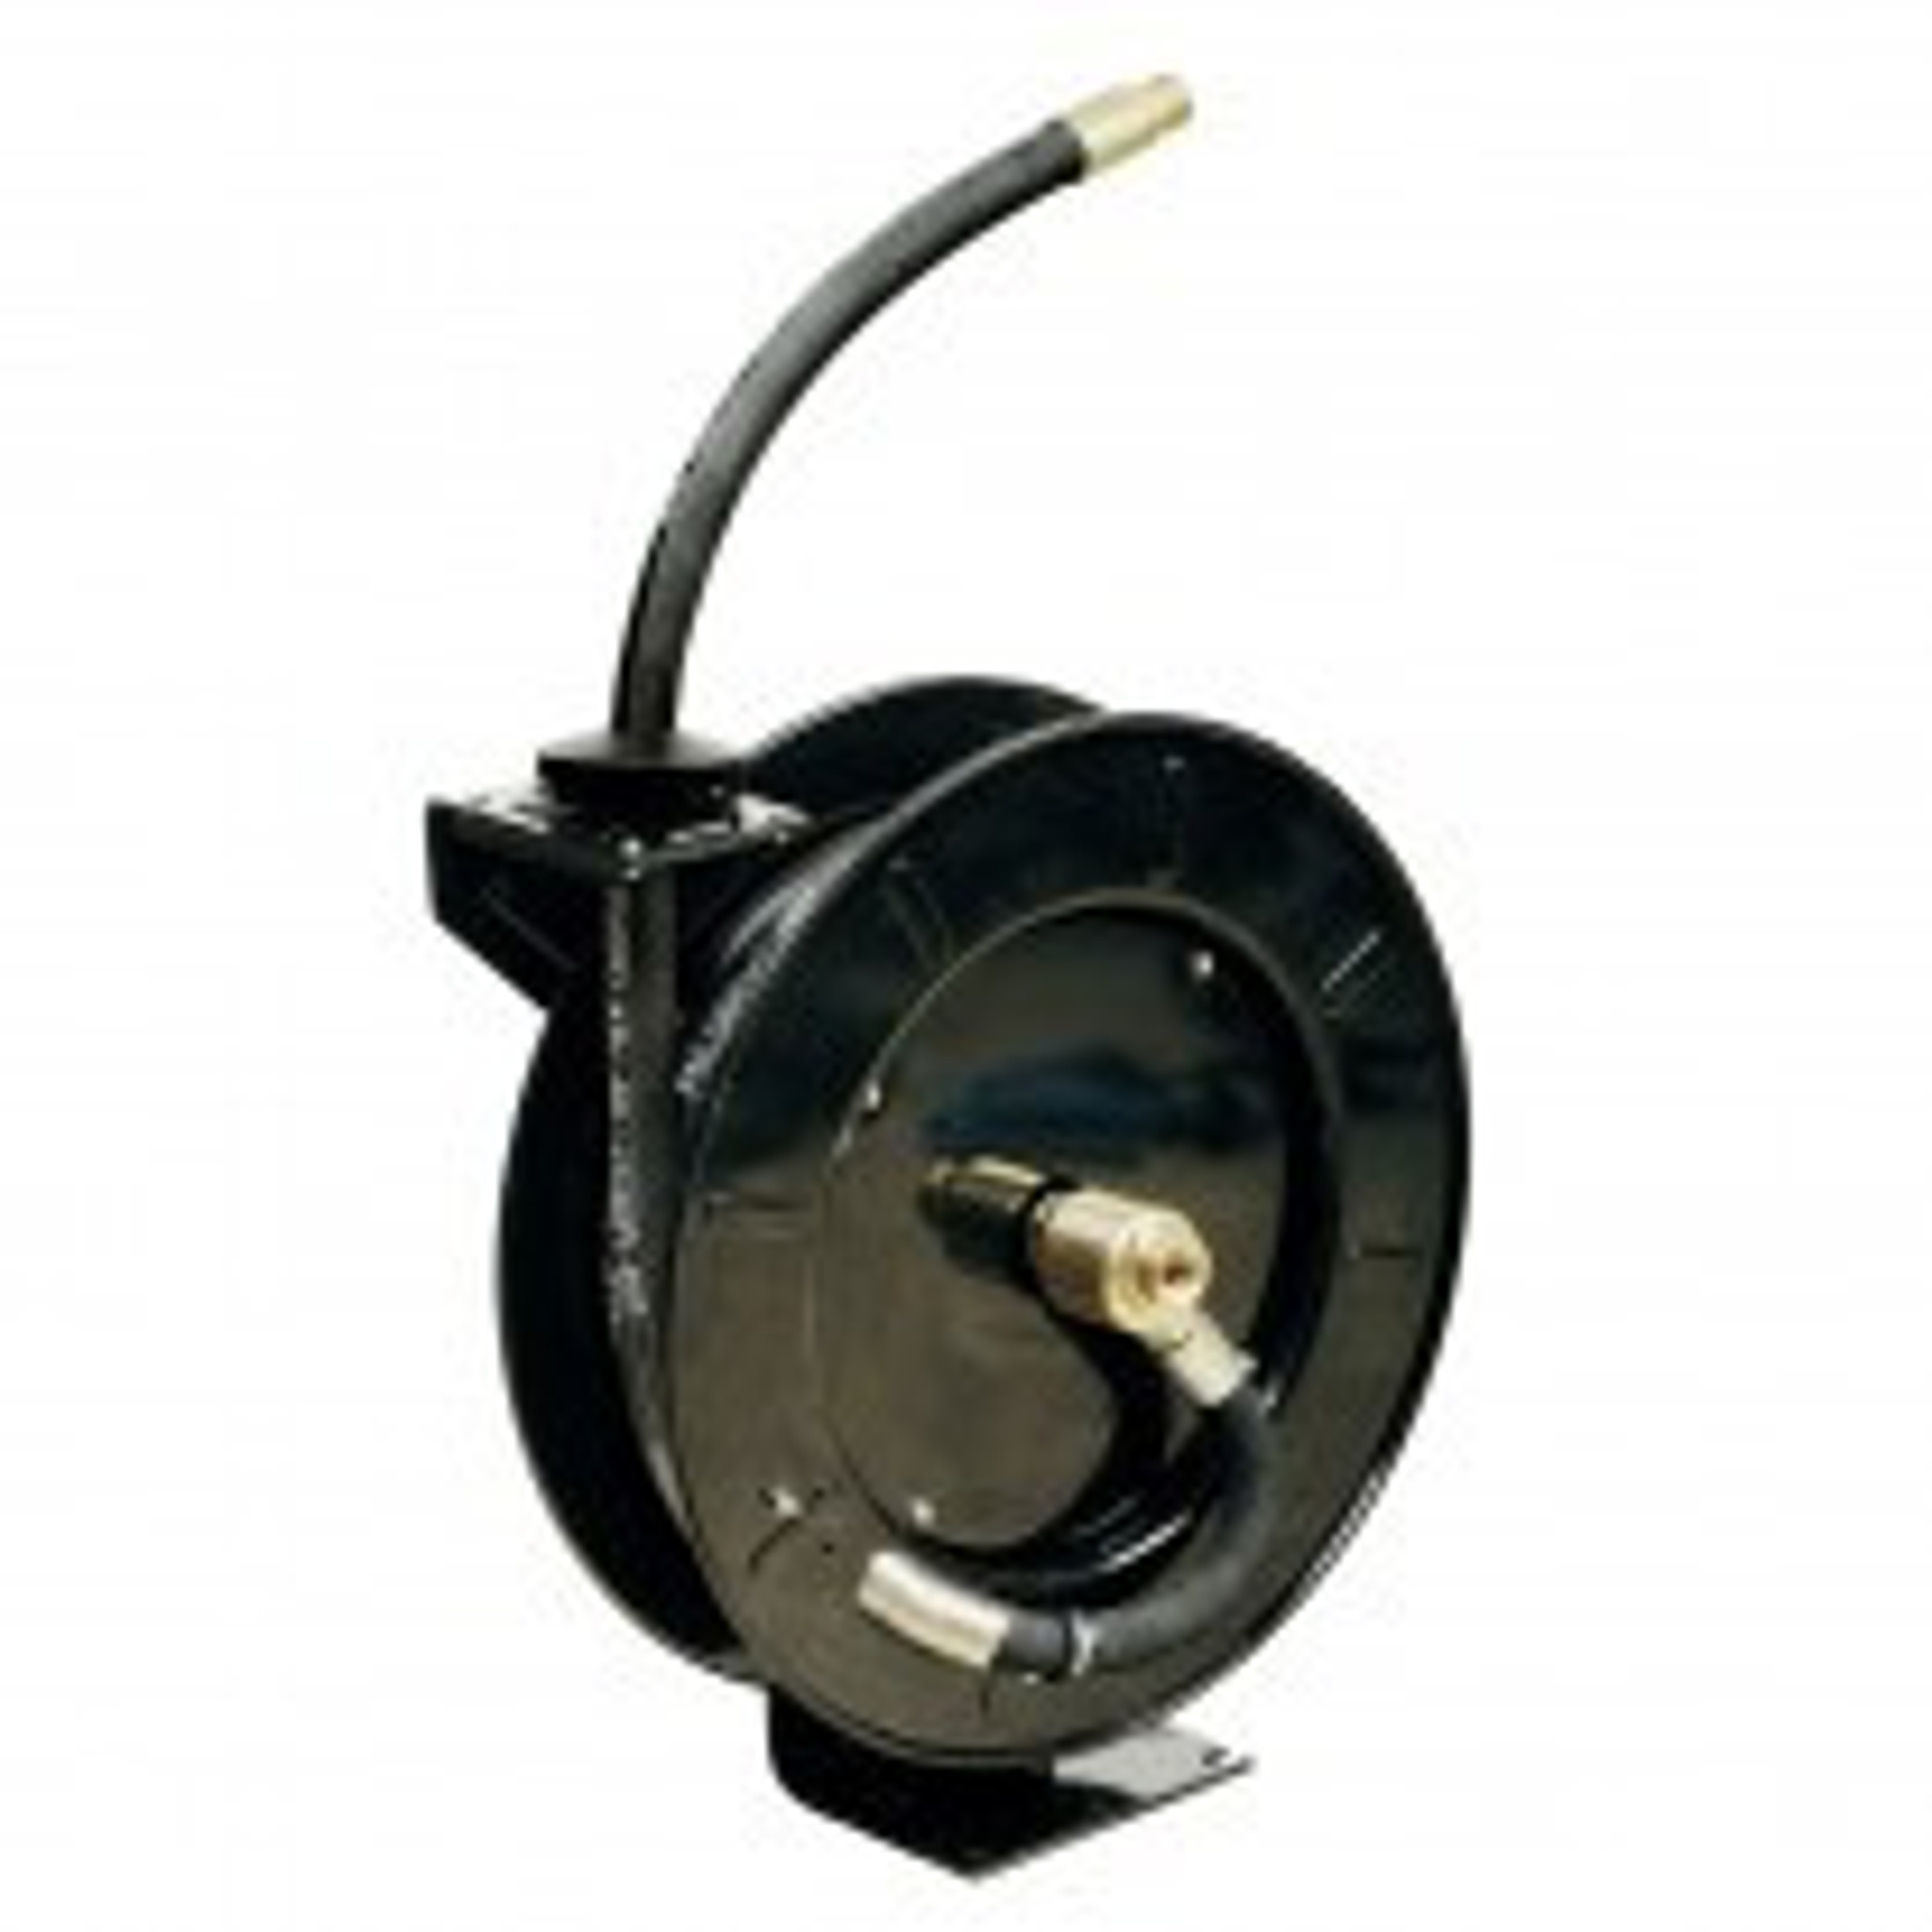 DITIHRM808106 STM Oil Hose Reel 10M x 3/4” - Filter Discounters